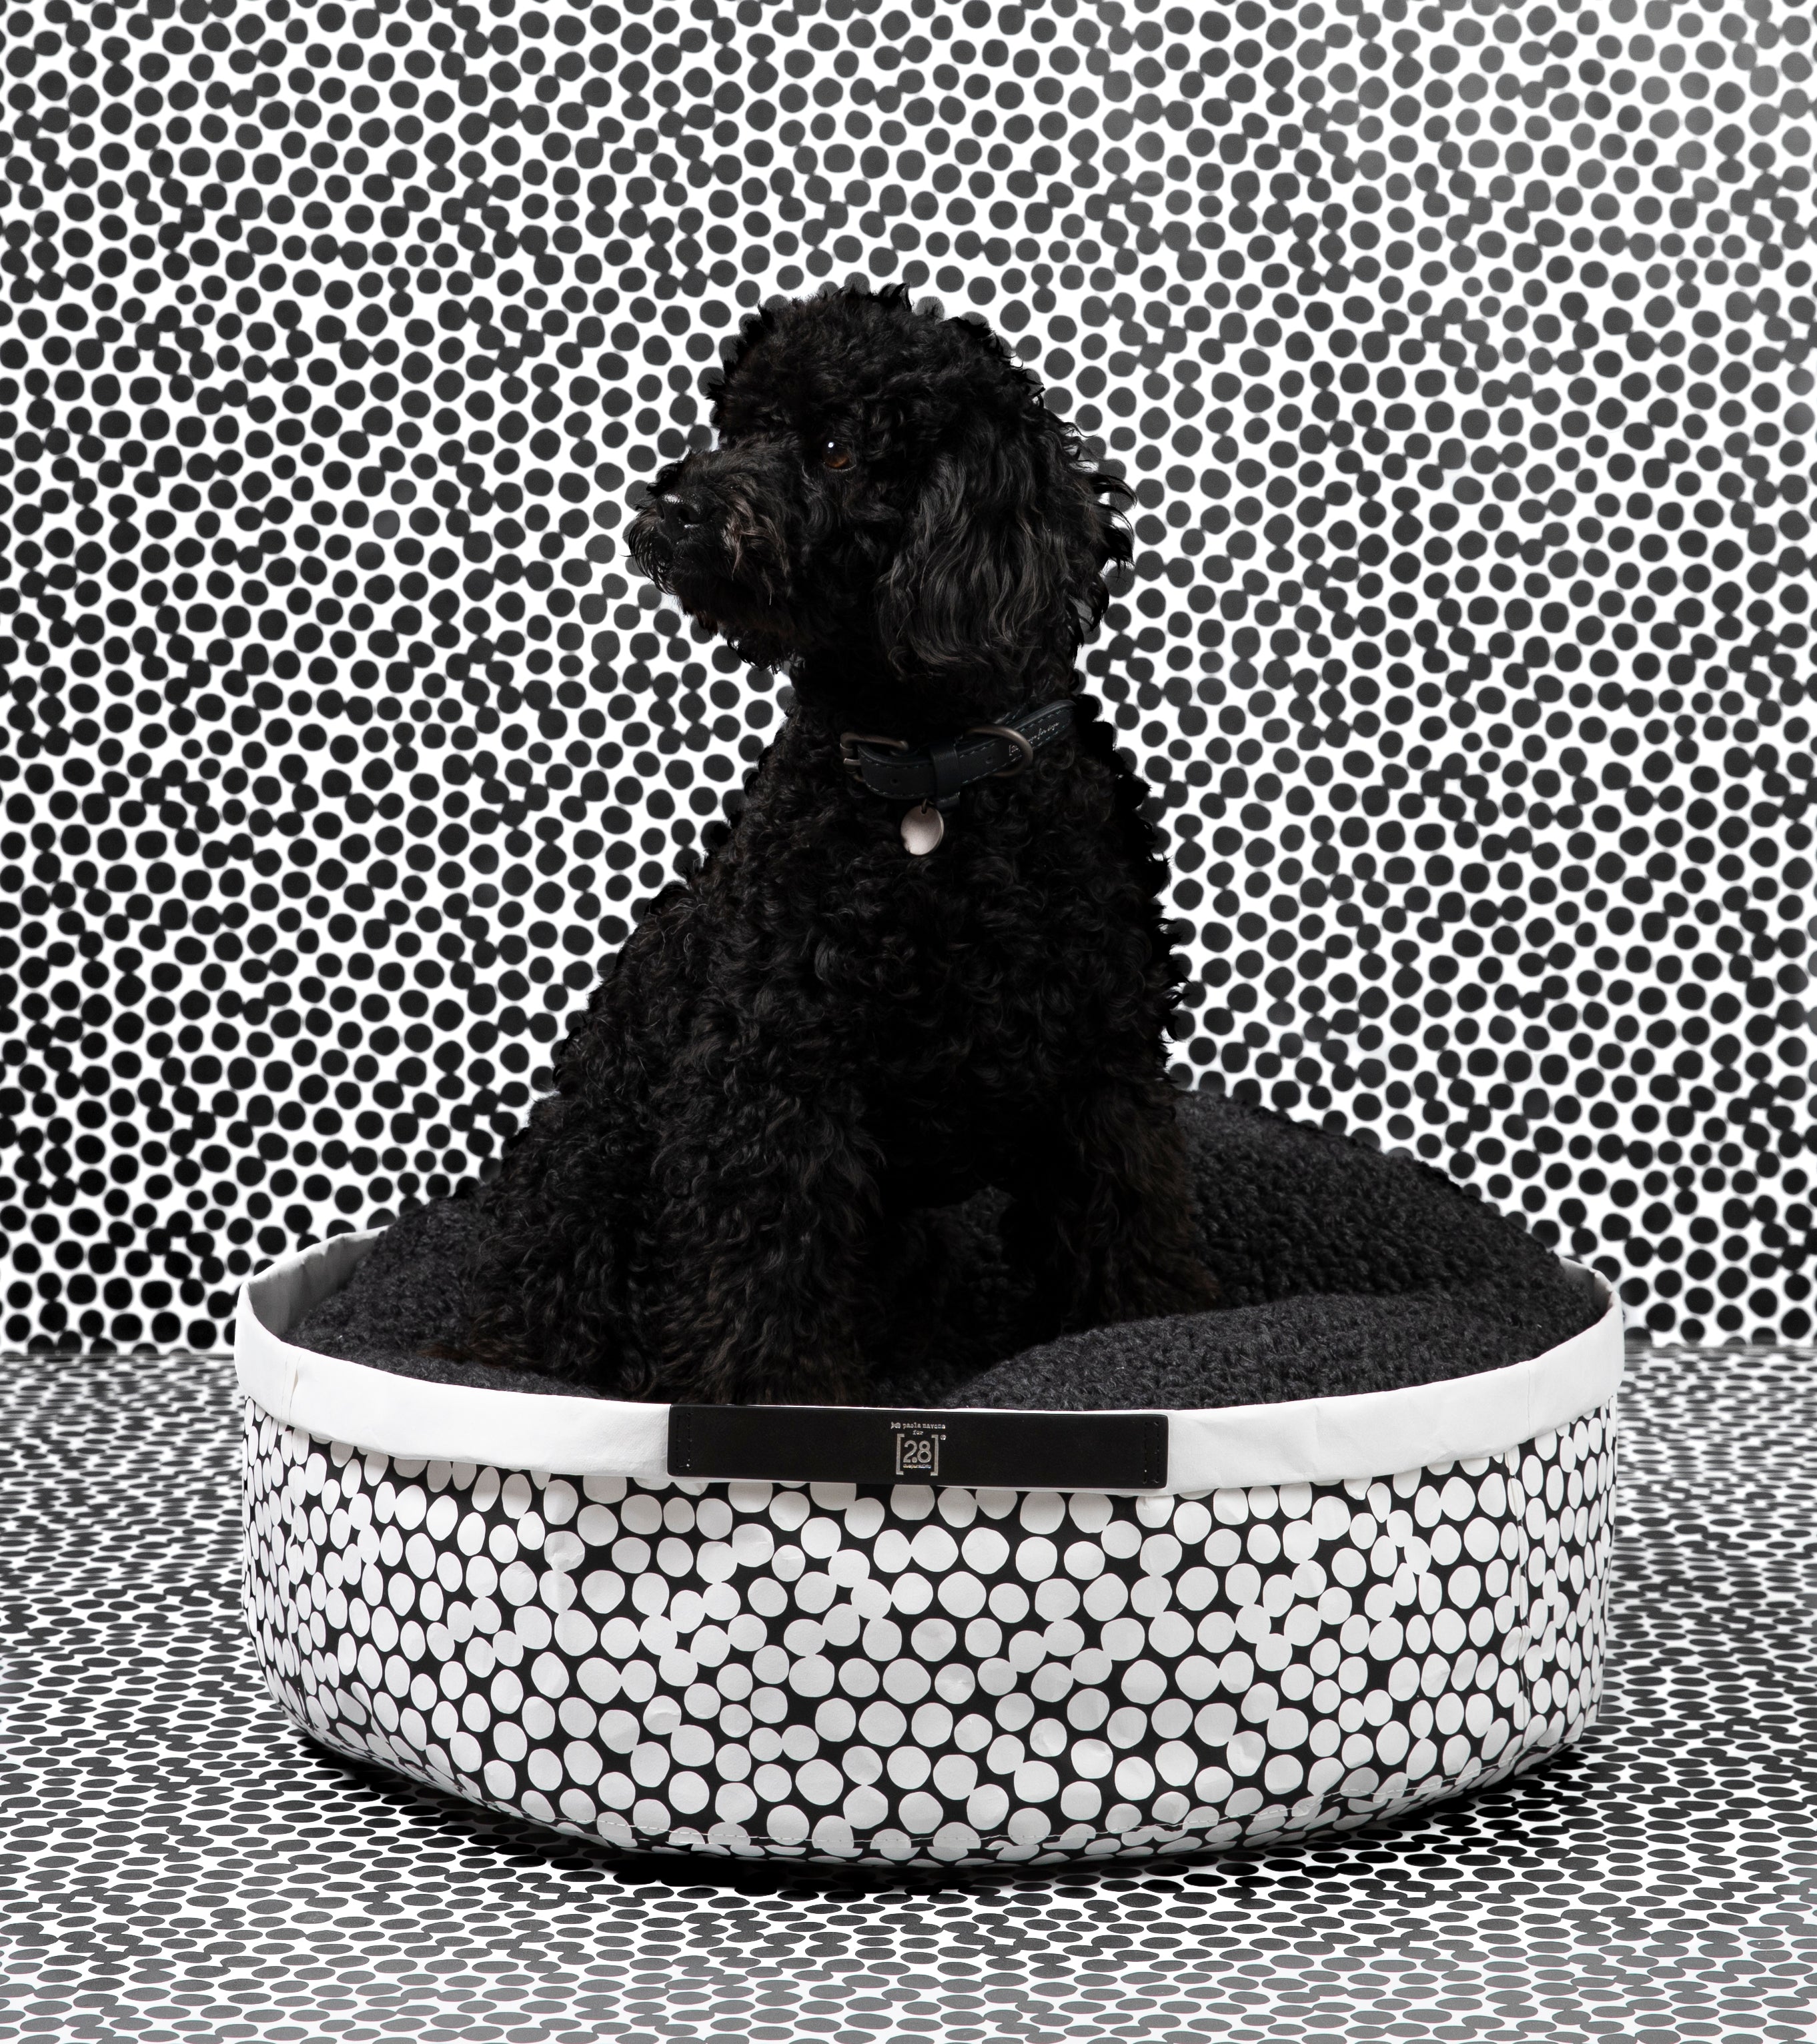 irving-dotto-collection-paola-navone-dog-cuschion_b2df9784-5279-4468-881f-d88f9abc59dd.jpg